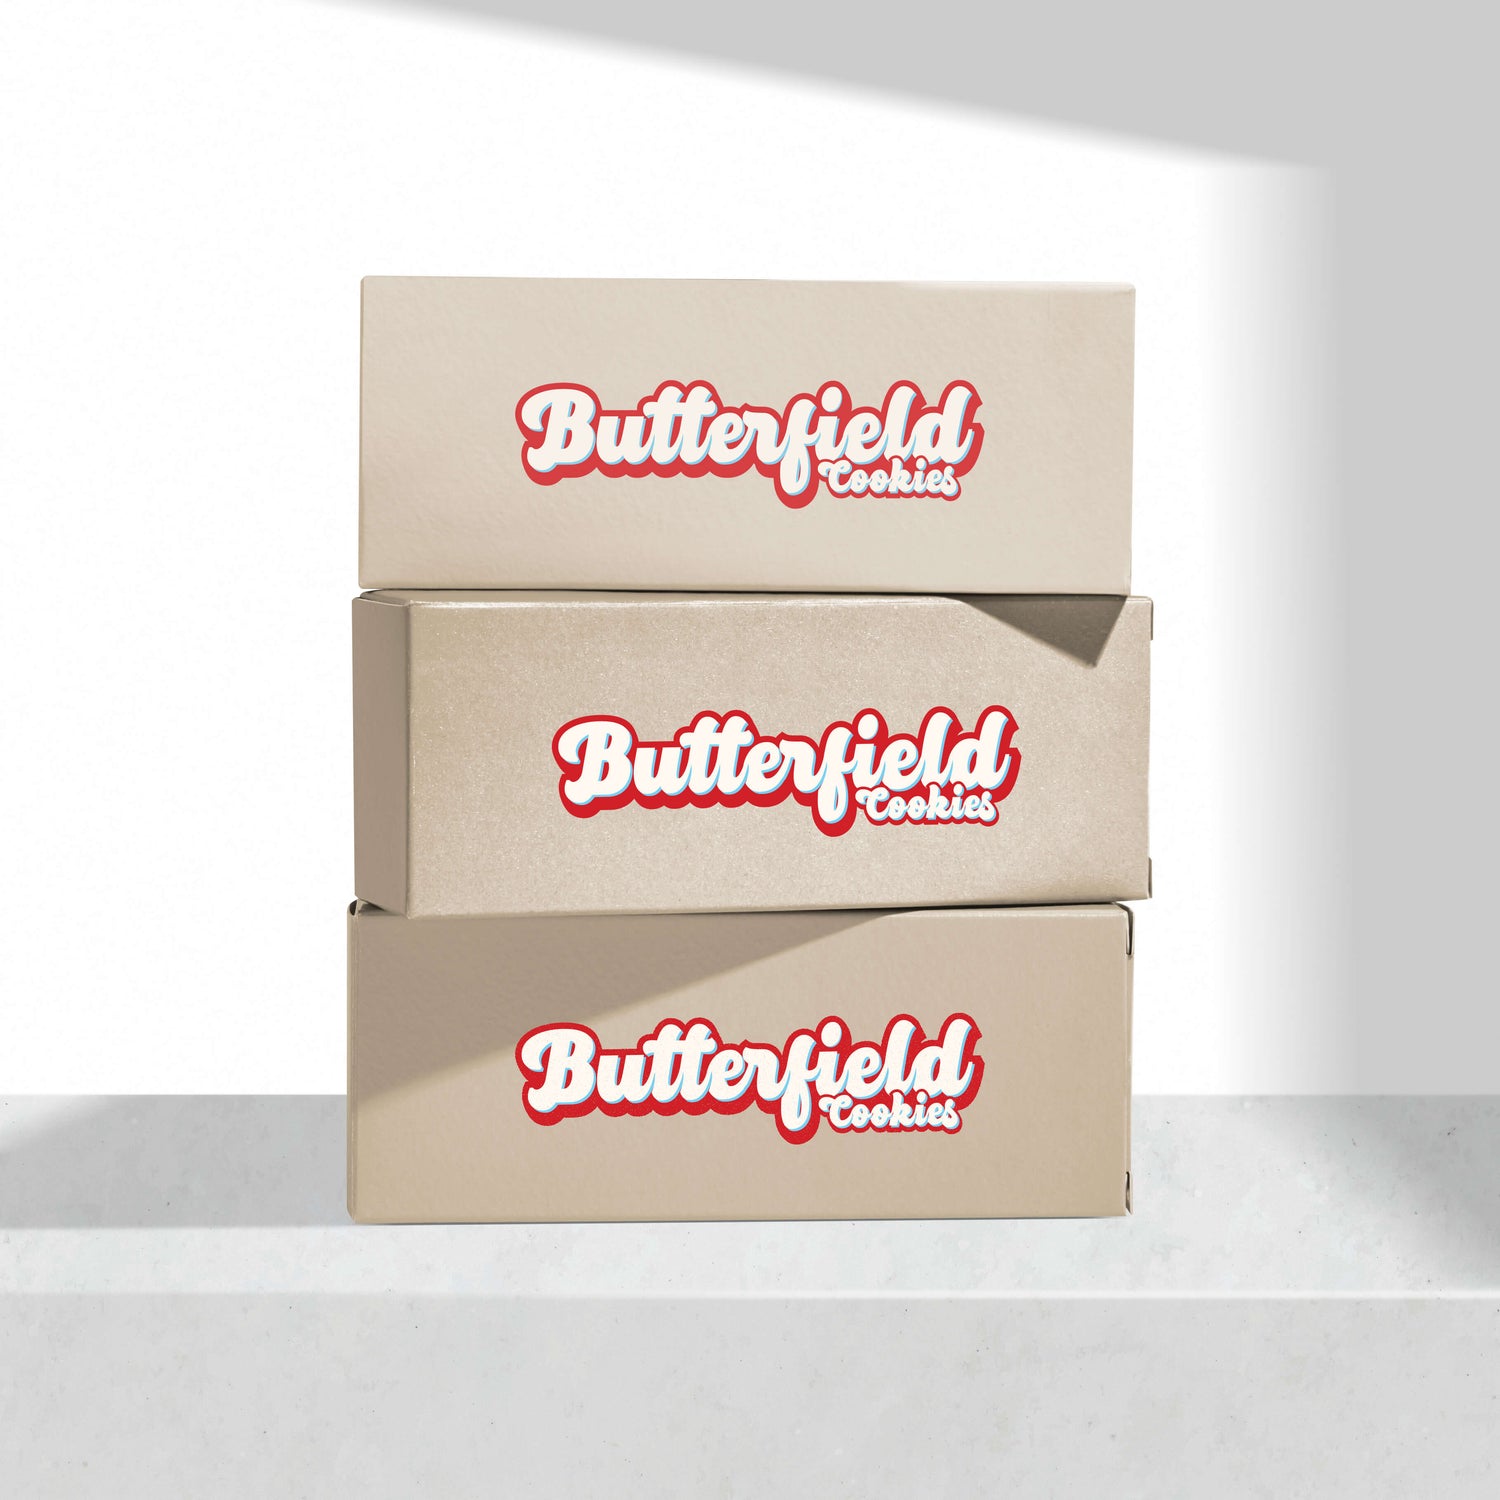 Butterfield Cookies' retro-style packaging featuring an assortment of chunky cookies in colorful wrapping.